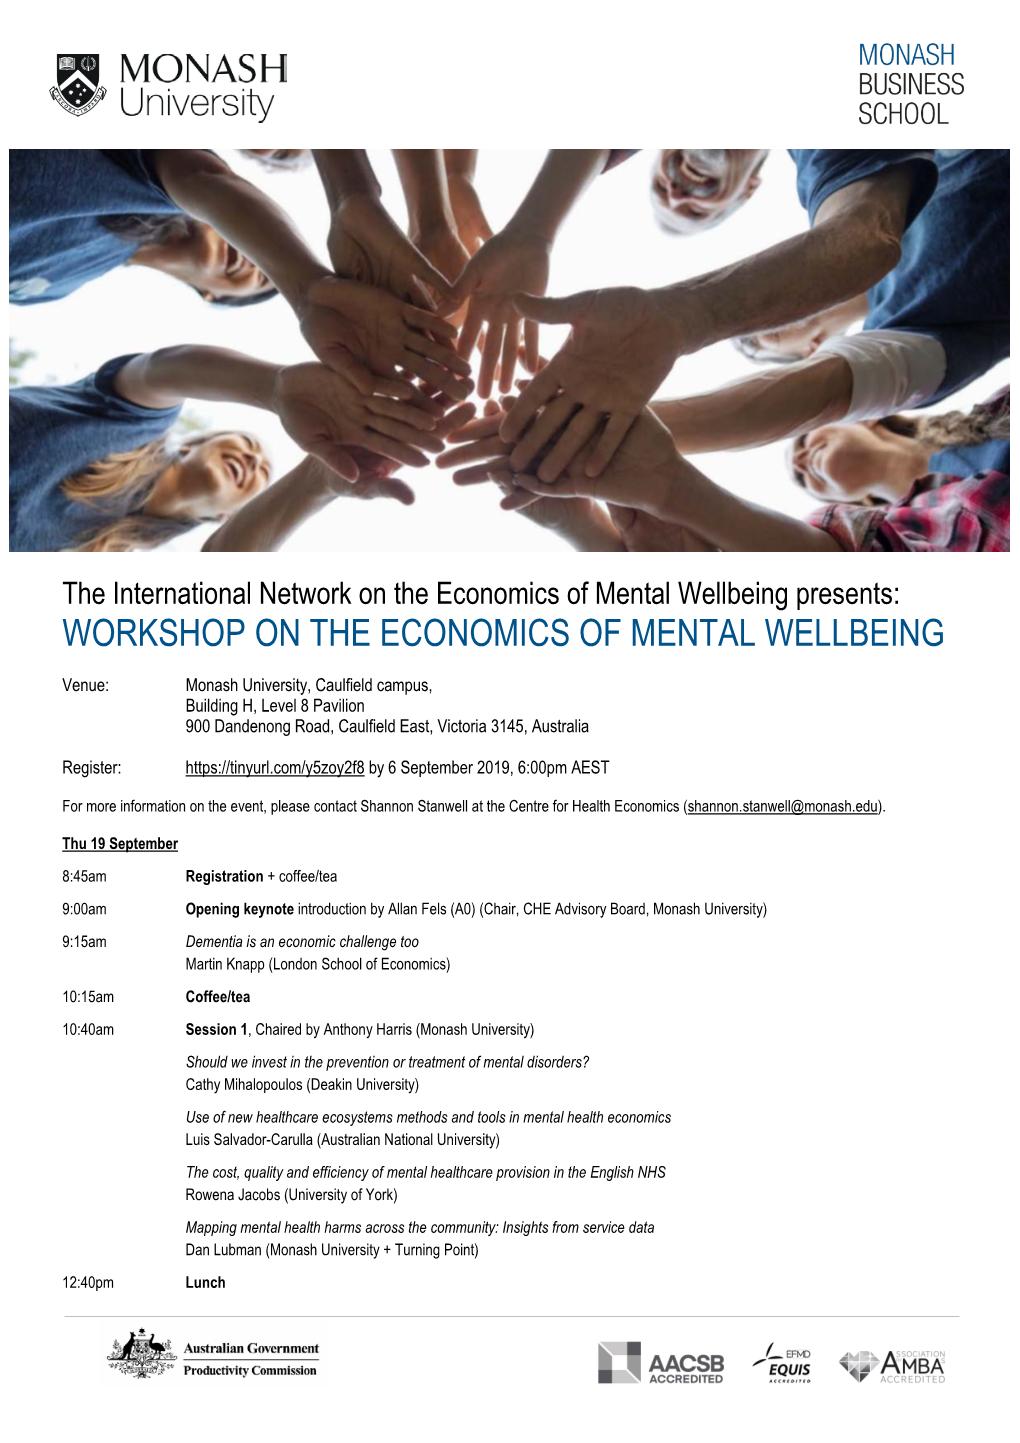 Workshop on the Economics of Mental Wellbeing